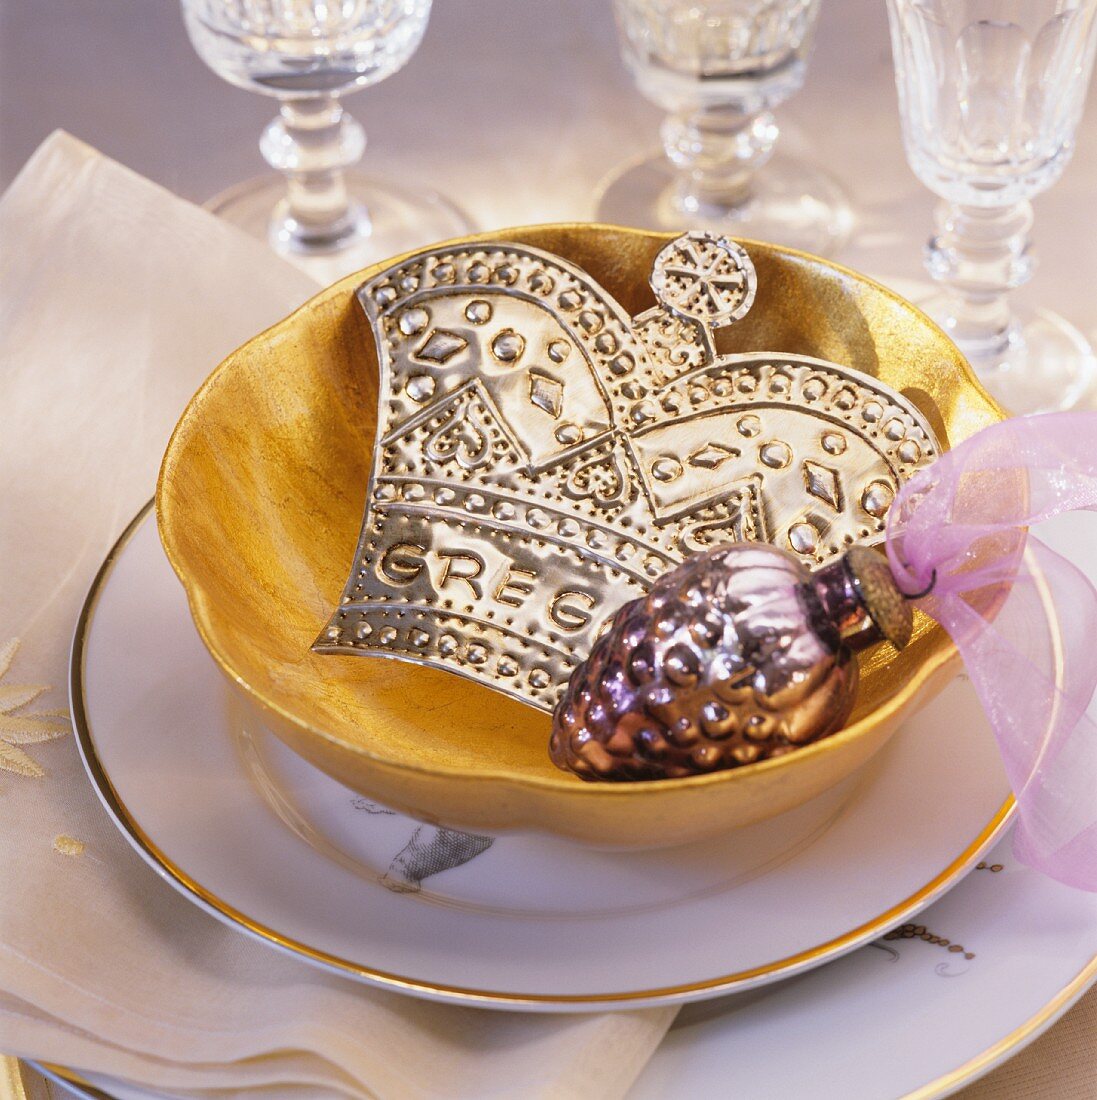 Christmas decorations in gold bowl on place setting with crystal glasses